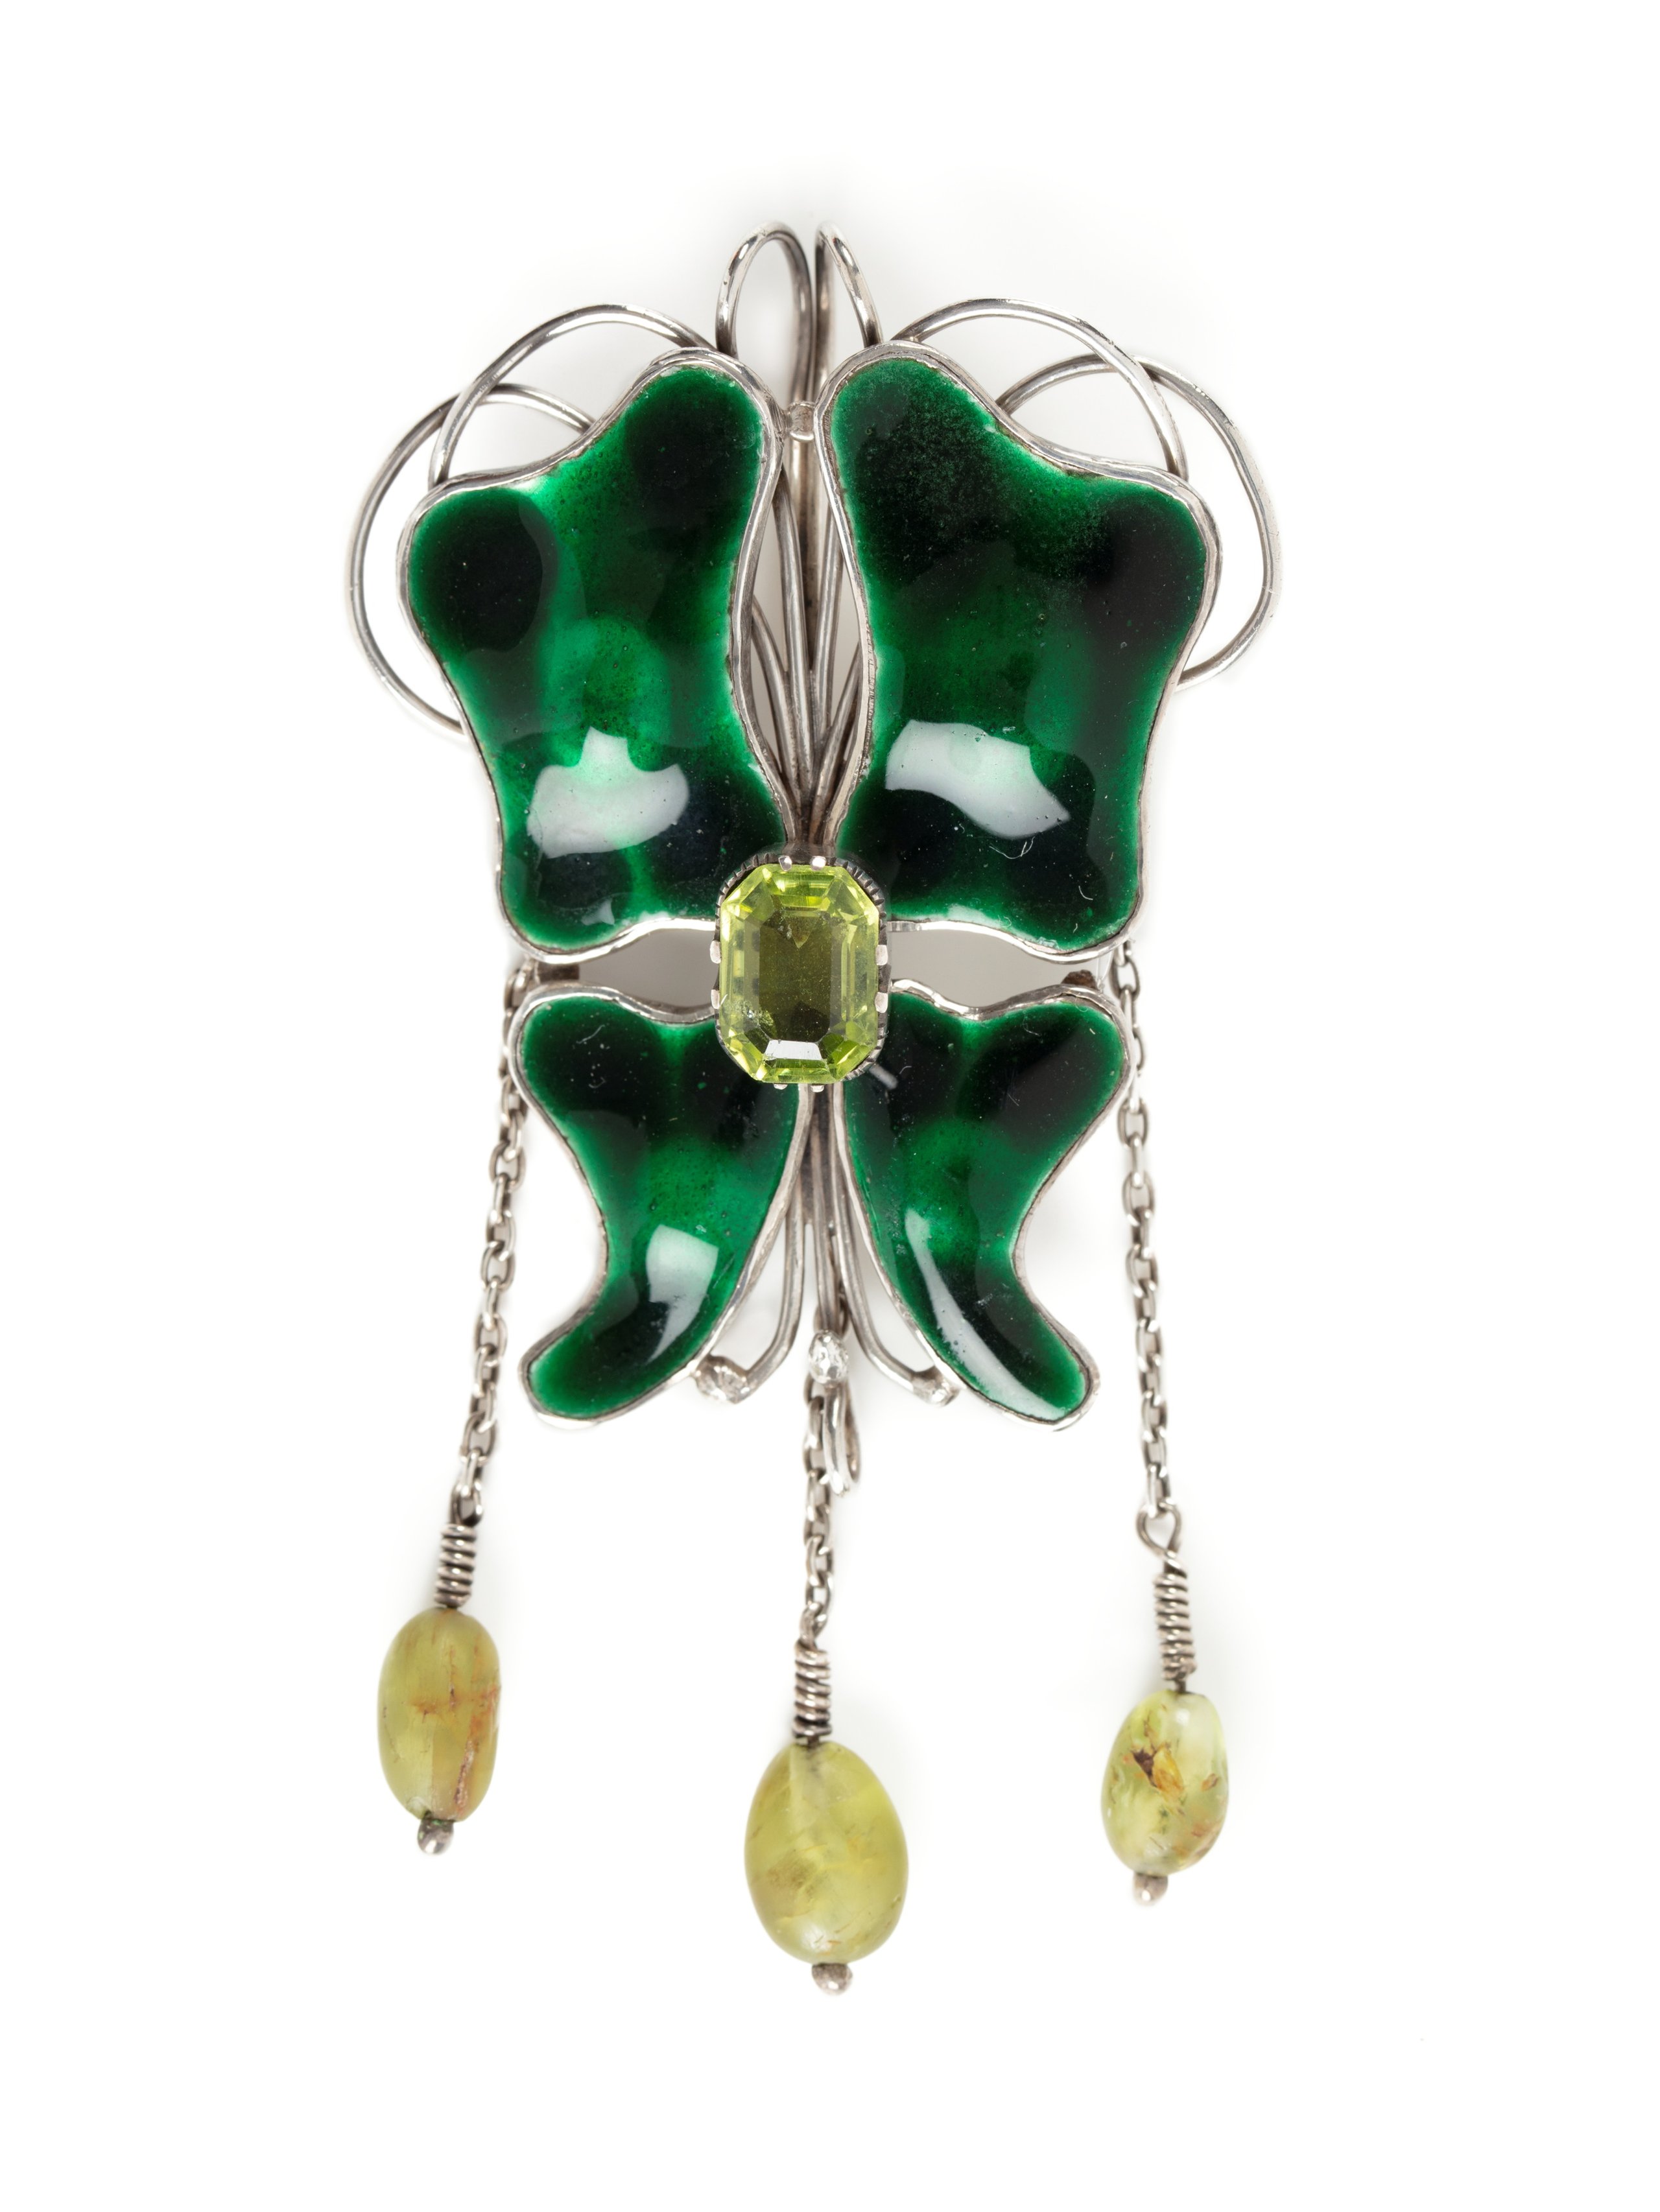 Pendant designed by Charles Robert Ashbee